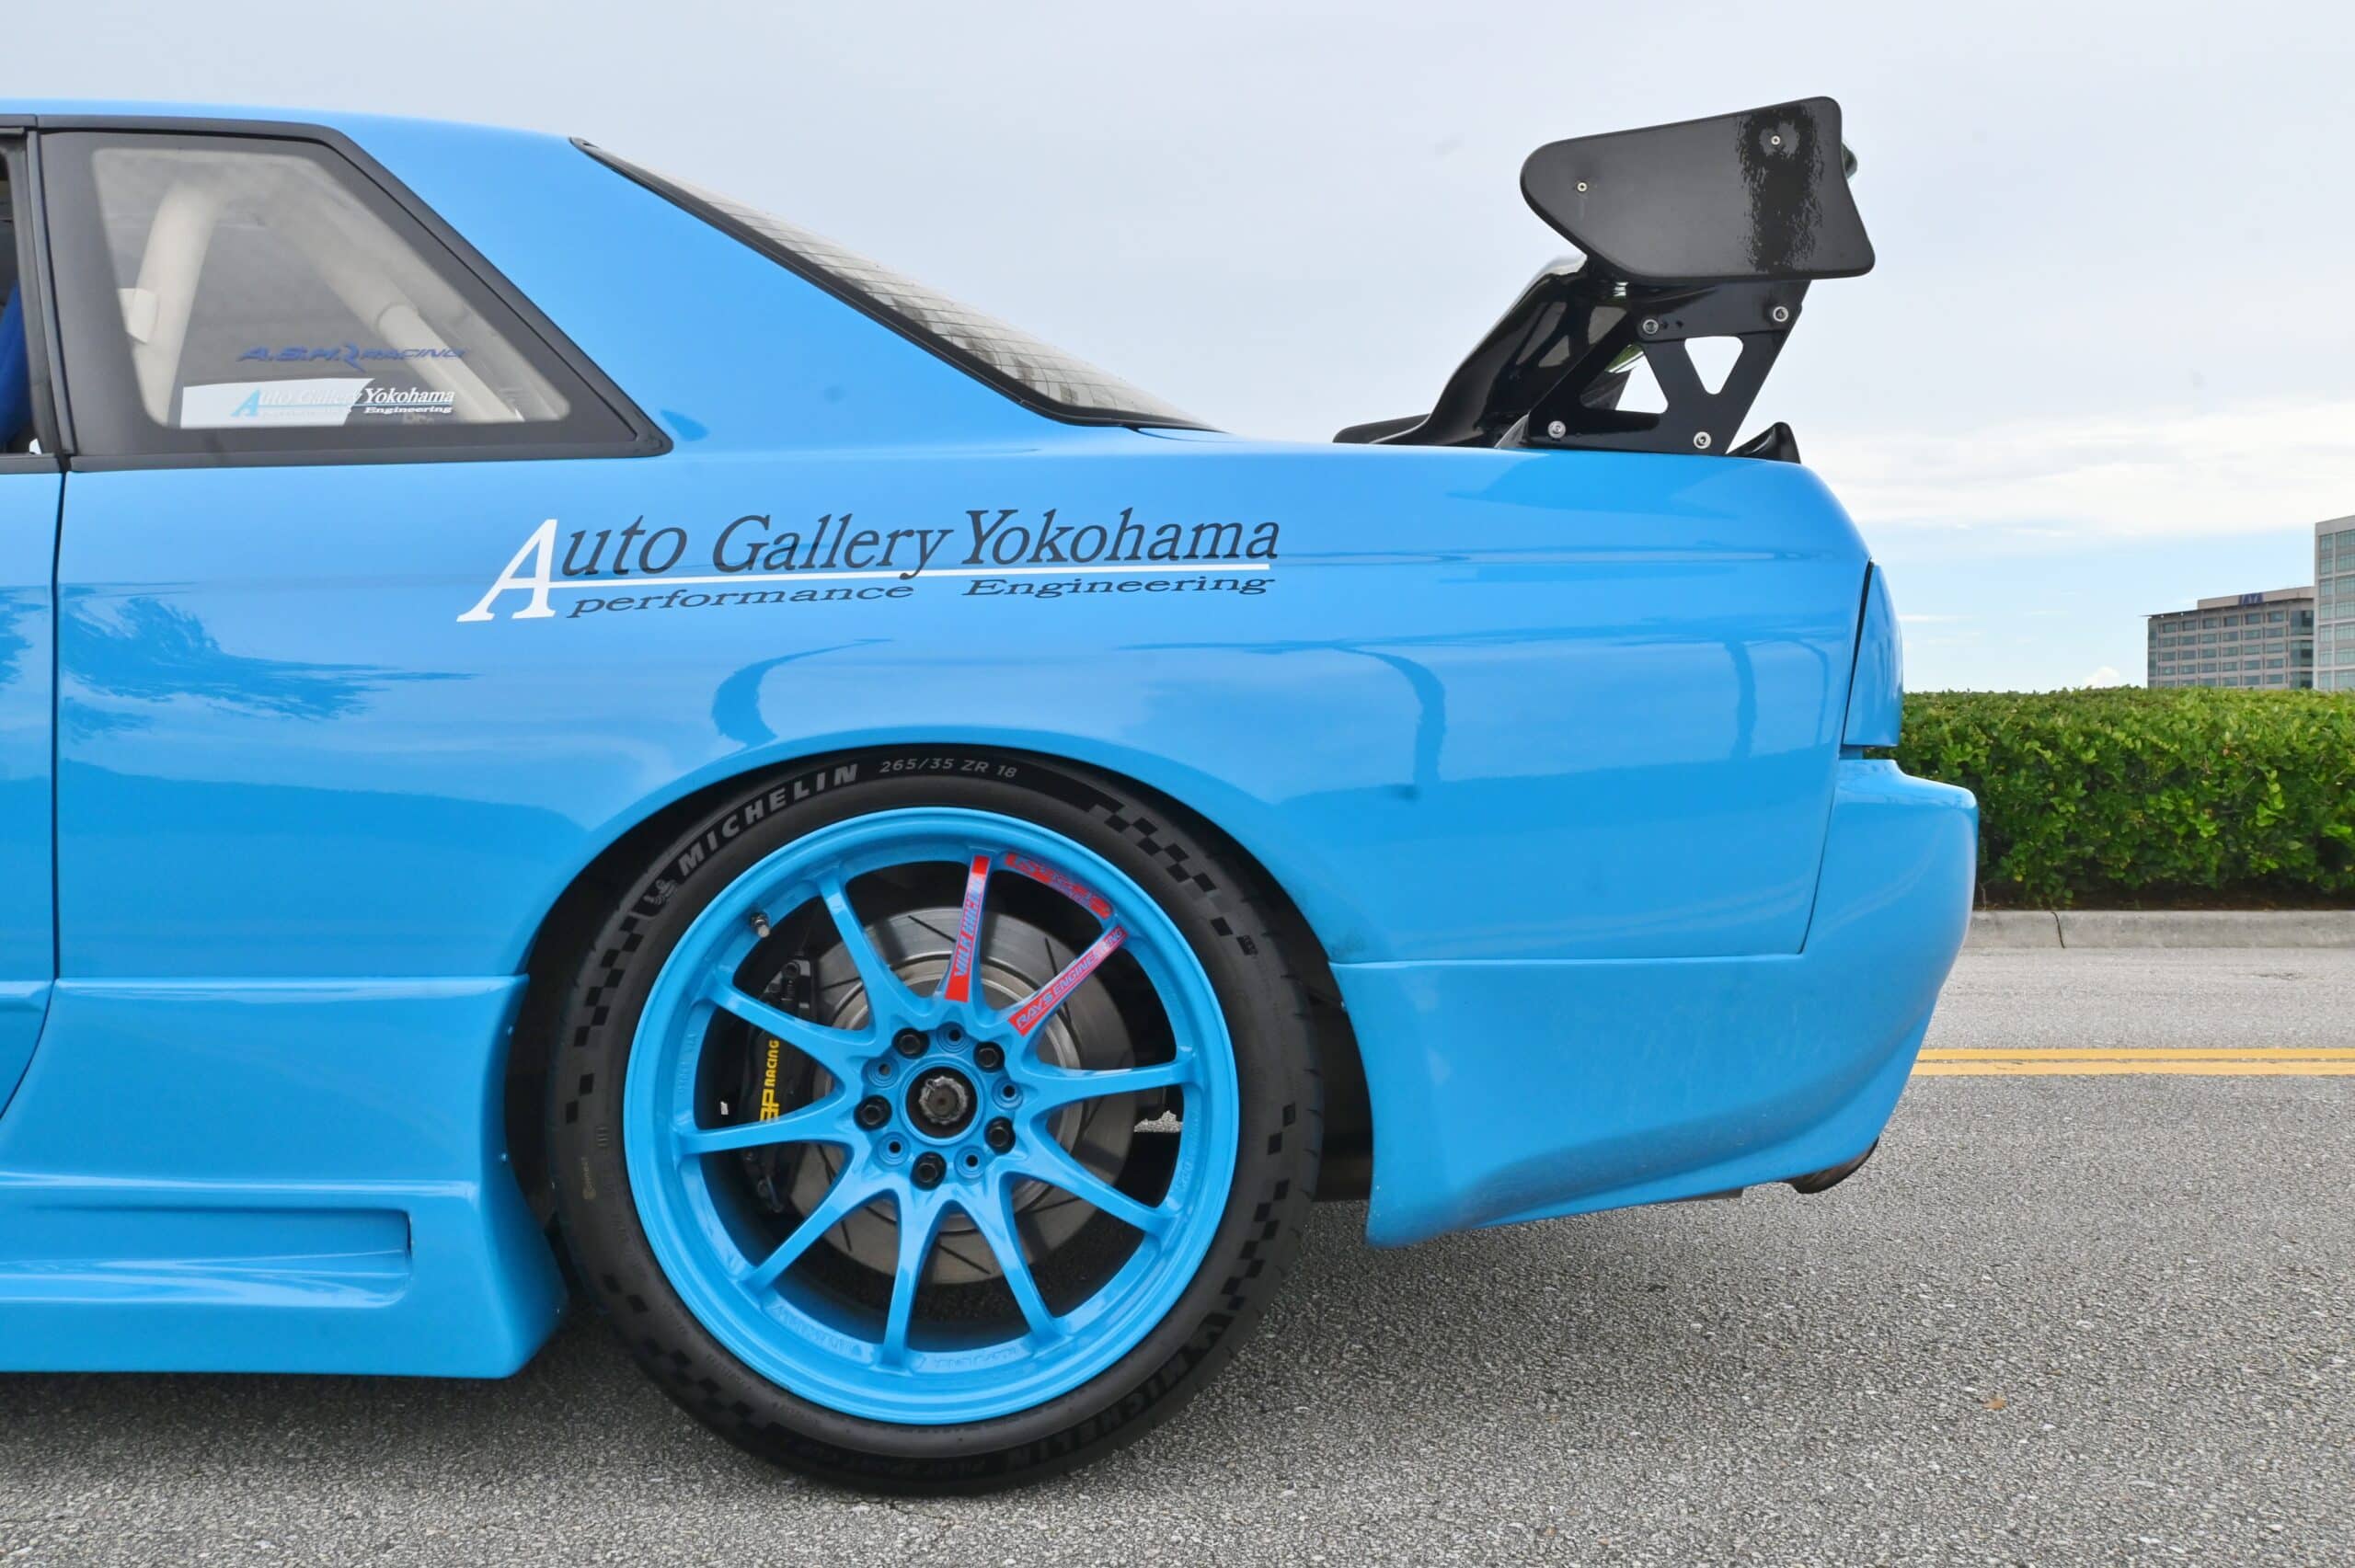 1994 Nissan GT-R R32 Skyline Time Attack/ Street | AG-Y Demo Car | 550PS | HKS Turbos | Full Build | Alcon